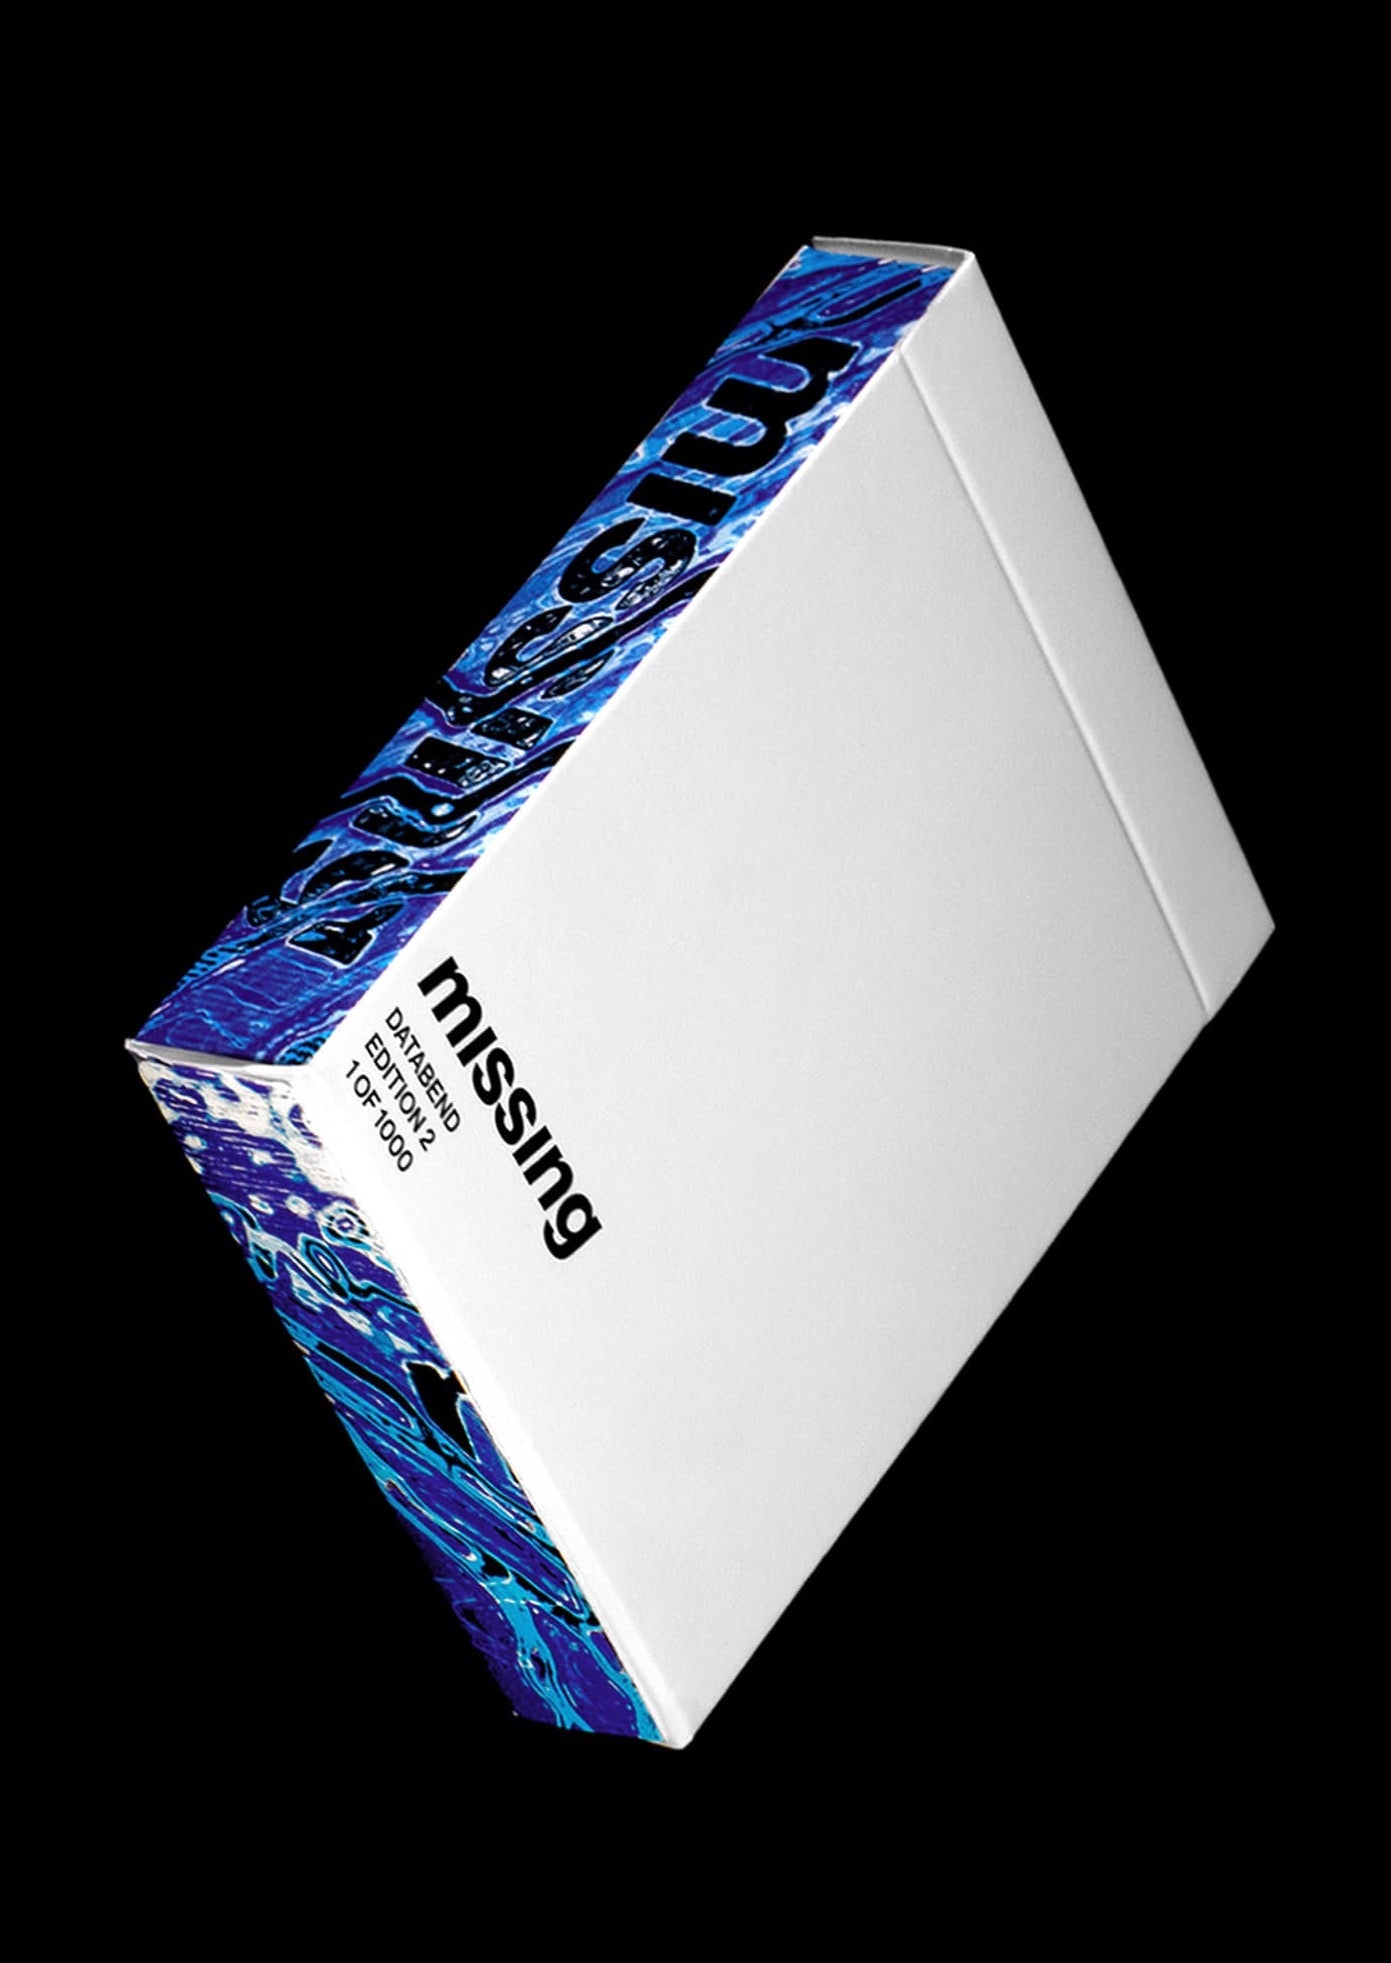 Missing cardistry databend playing cards decks uspcc 